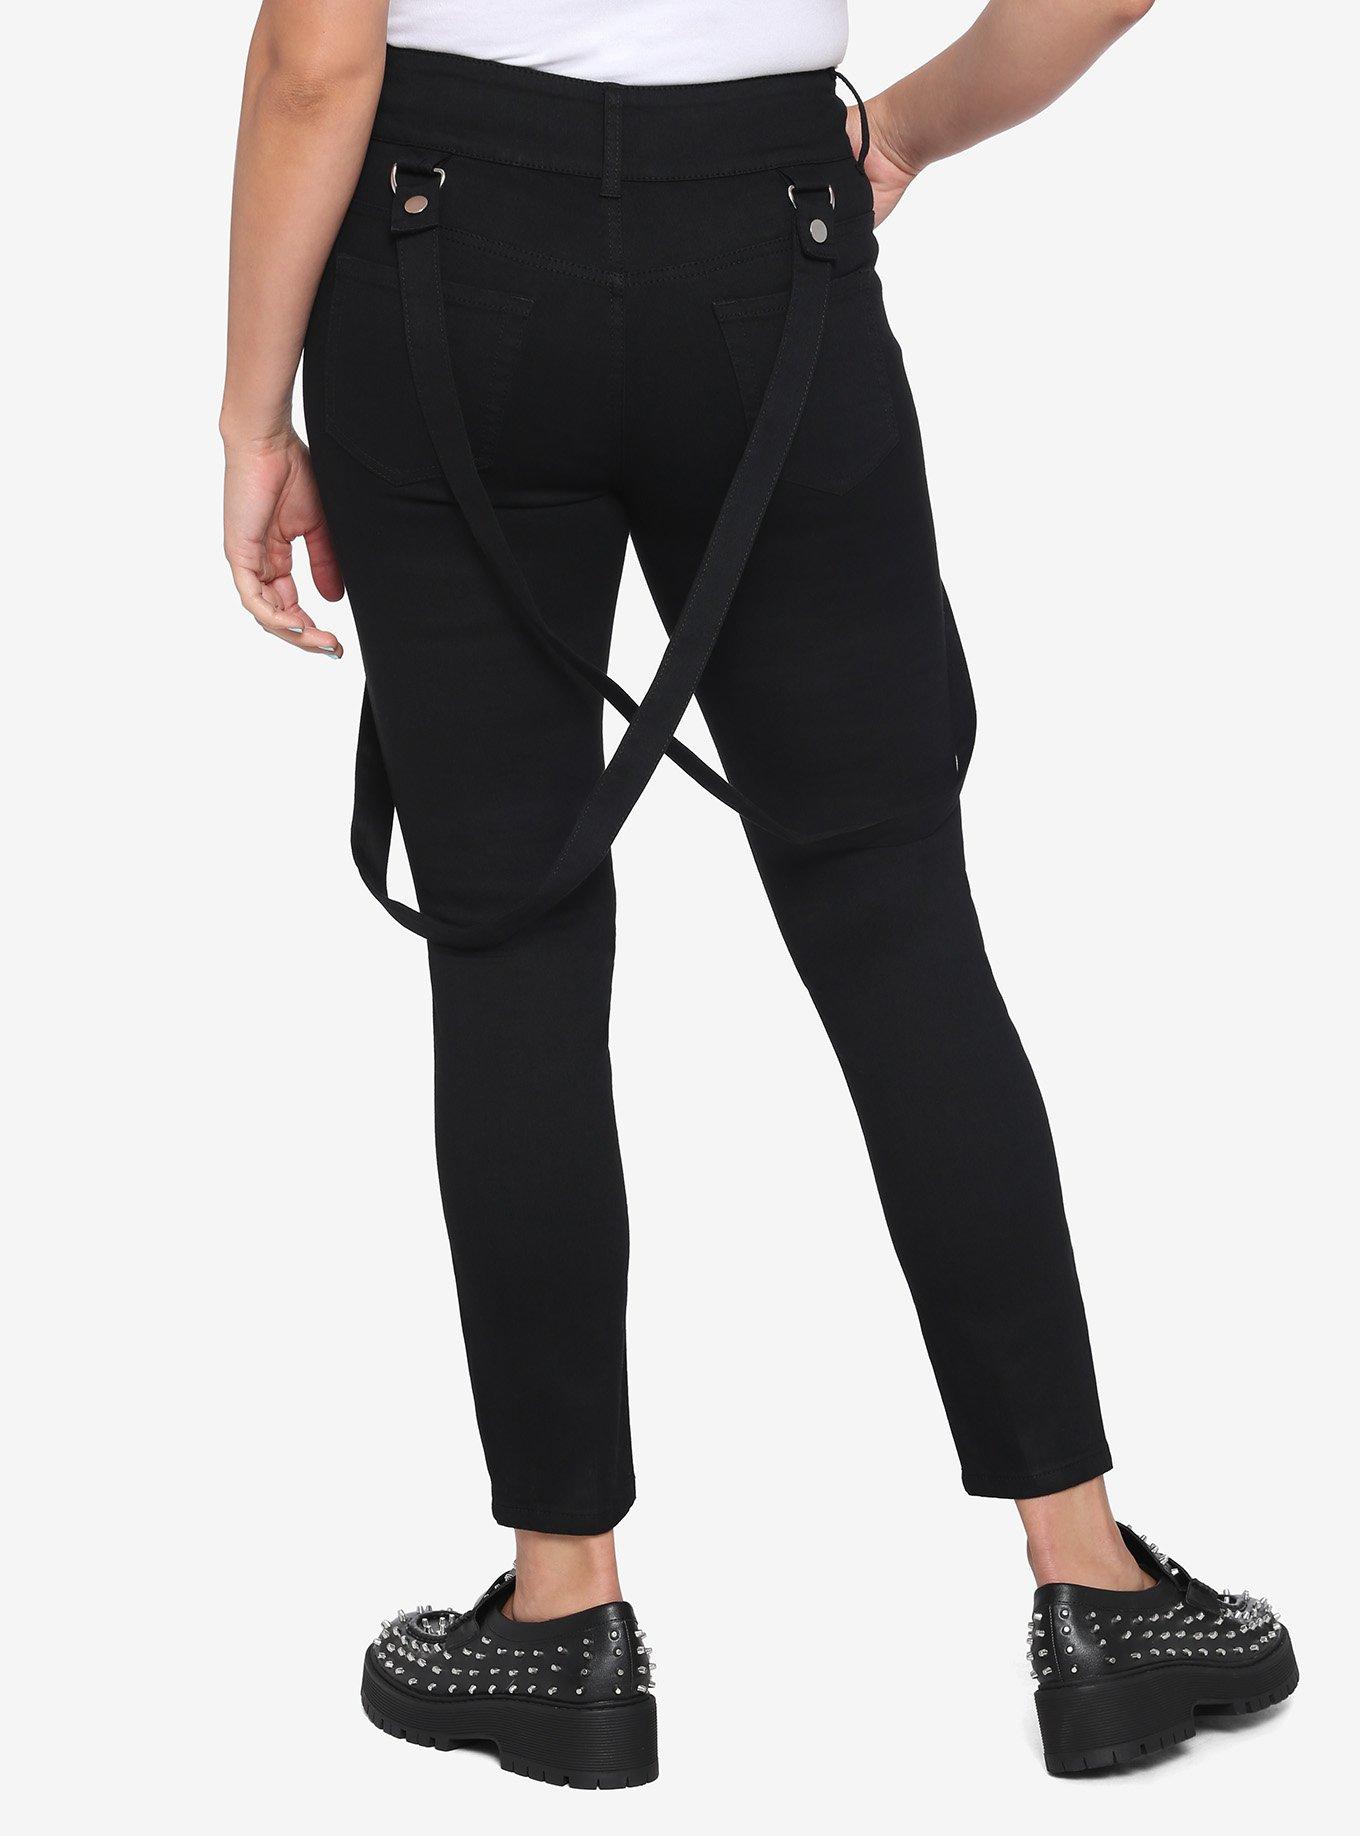 PNS Black Jeans with Suspenders 4